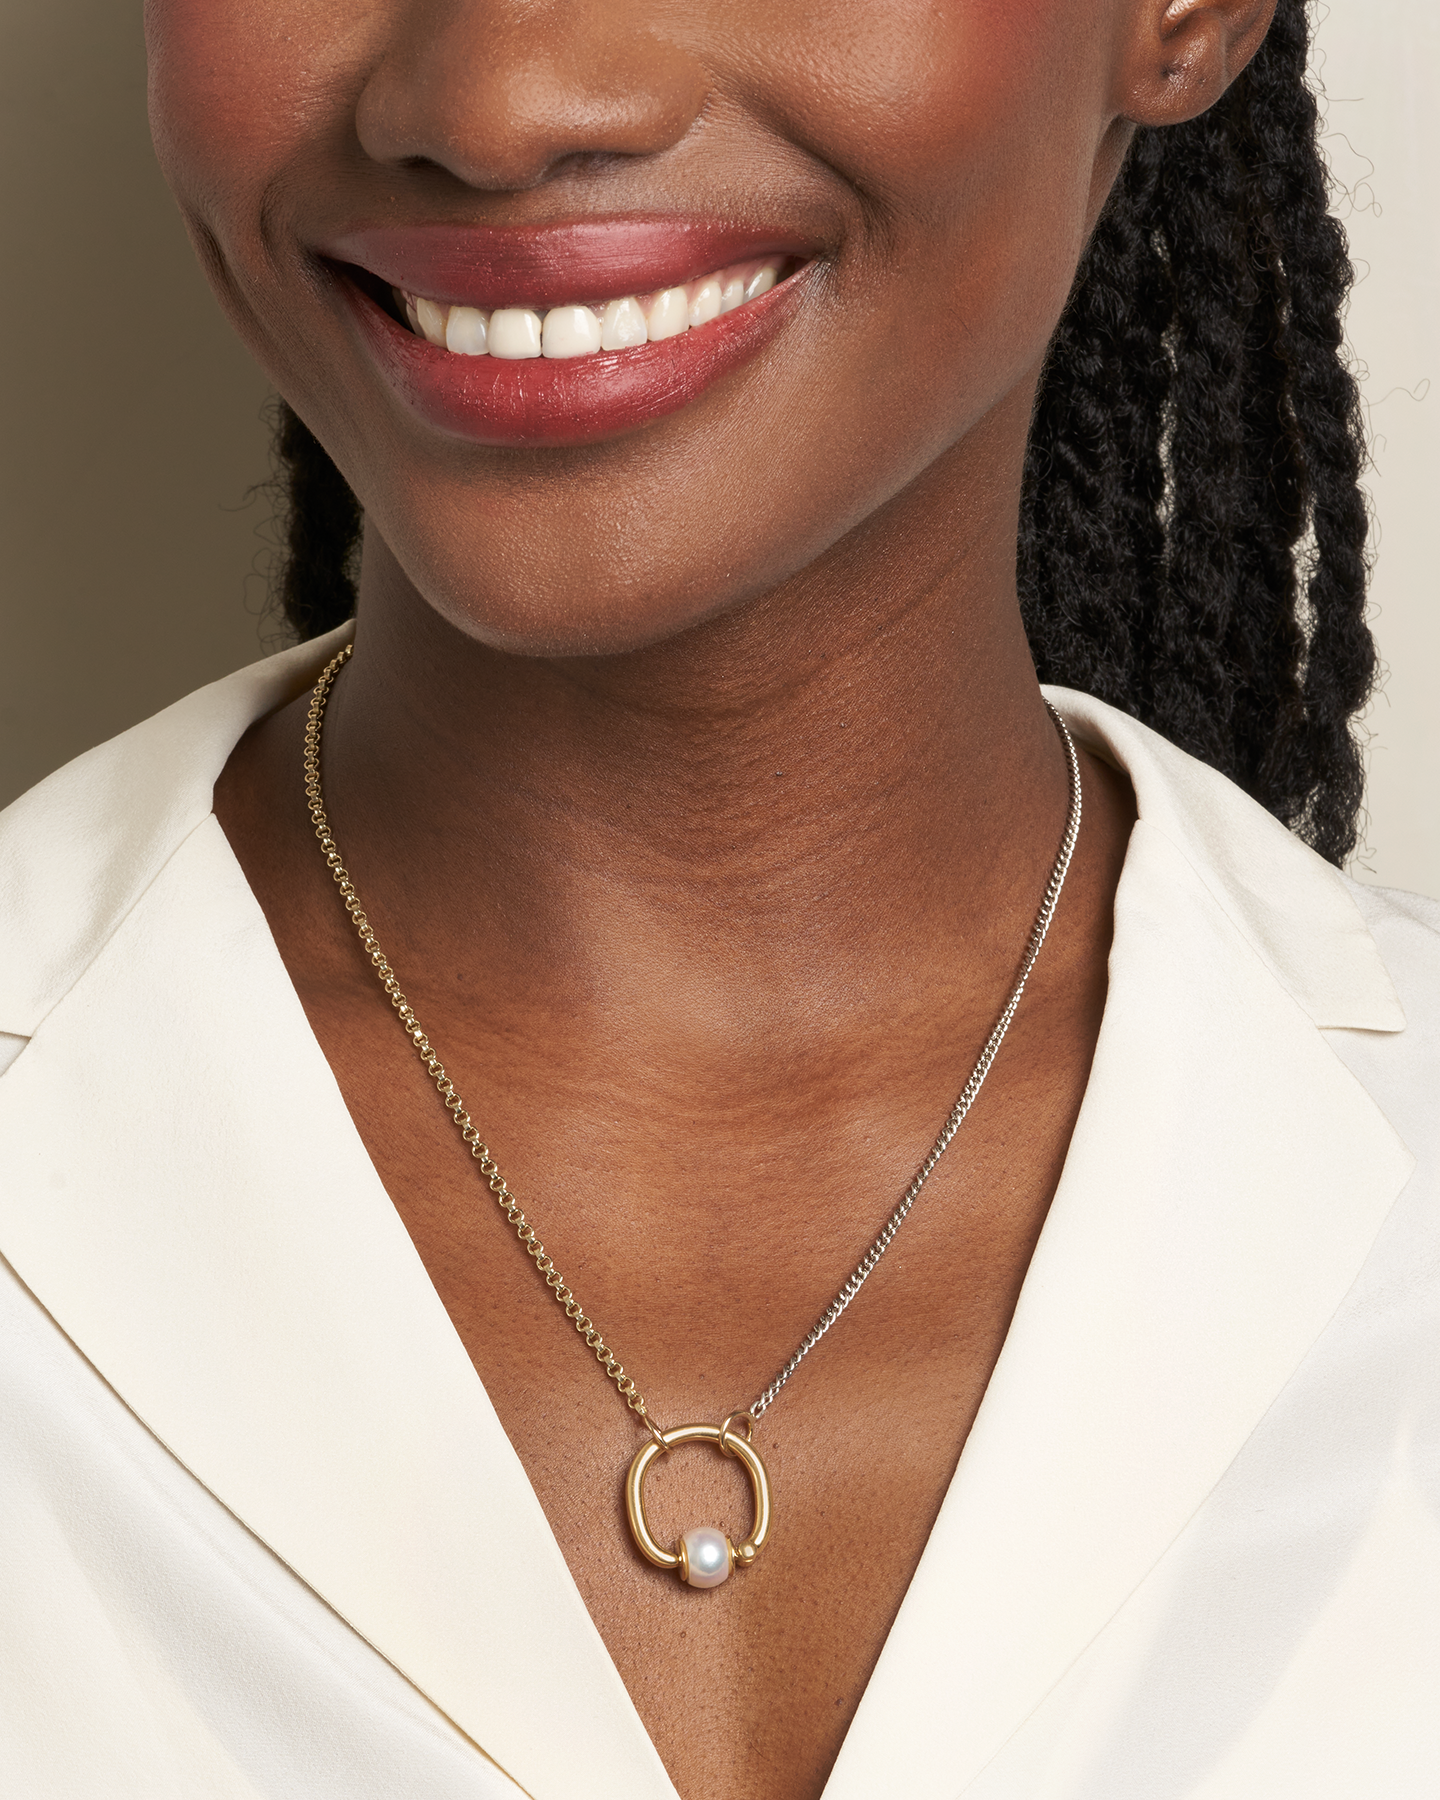 Close up of woman's decolletage with gold necklace with pearl trundle ring on it